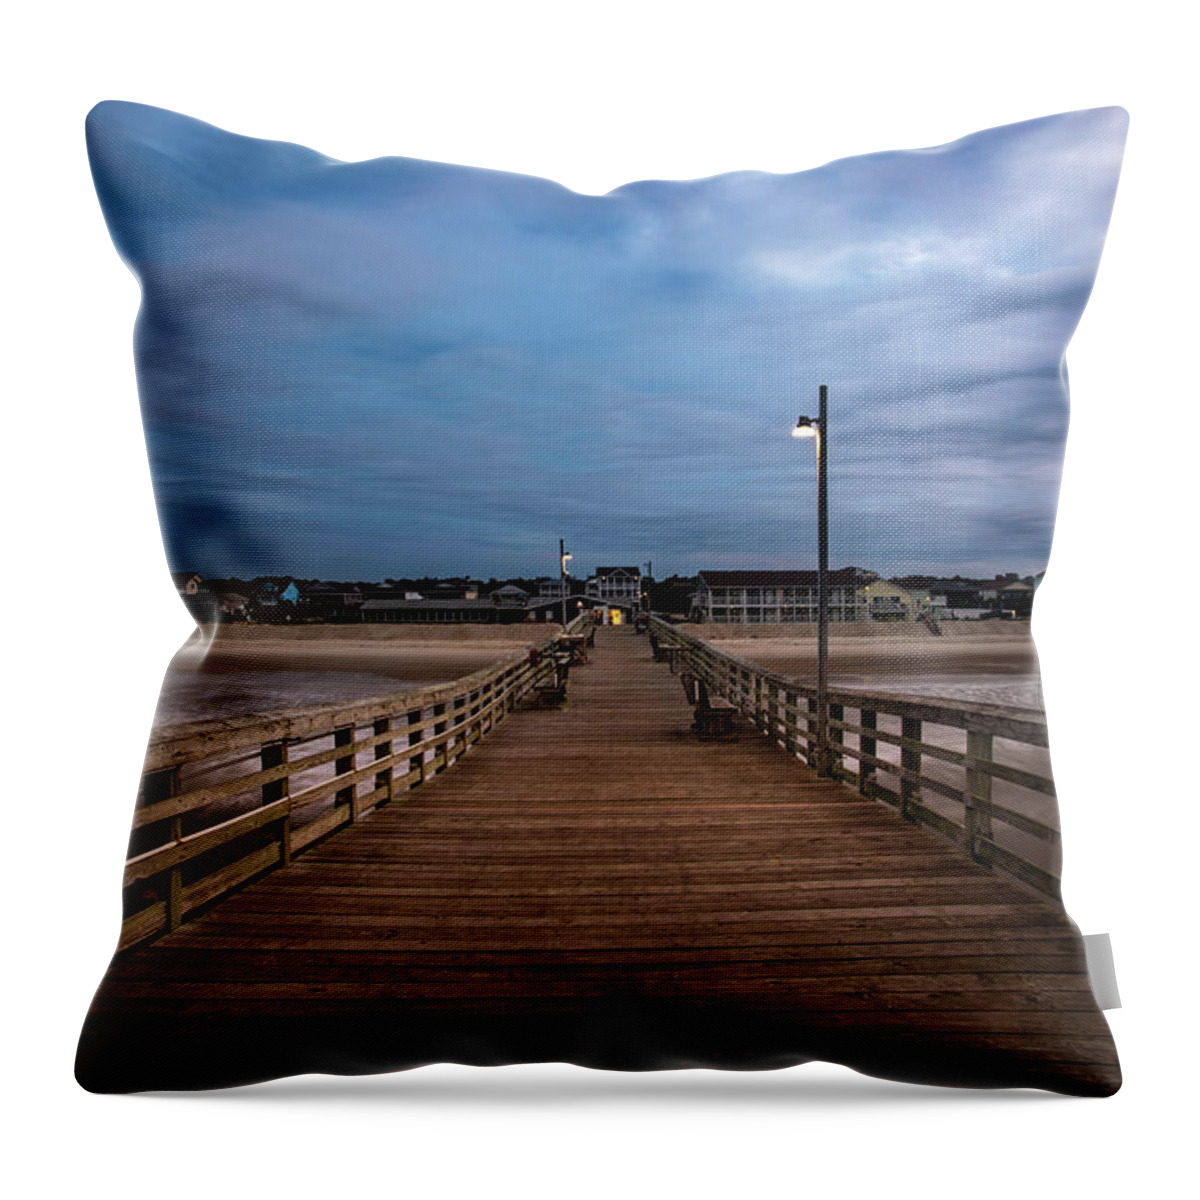 Oak Island Throw Pillow featuring the photograph Oceancrest by Nick Noble